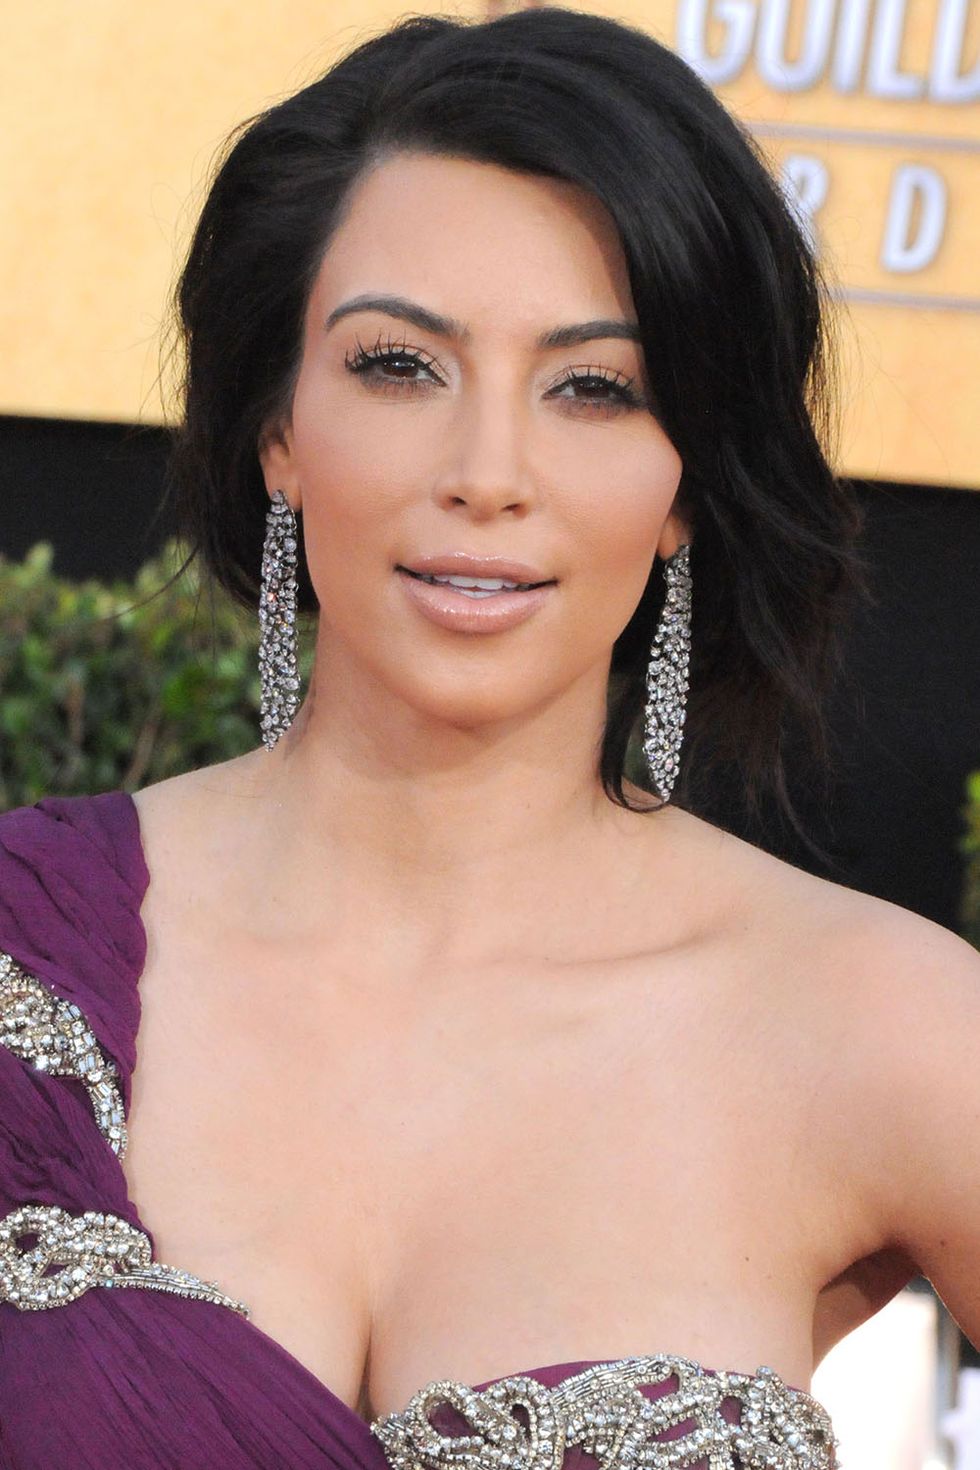 LOS ANGELES, CA - JANUARY 30:  TV personality Kim Kardashian arrives at the 17th Annual Screen Actors Guild Awards at The Shrine Auditorium on January 30, 2011 in Los Angeles, California.  (Photo by Barry King/FilmMagic)